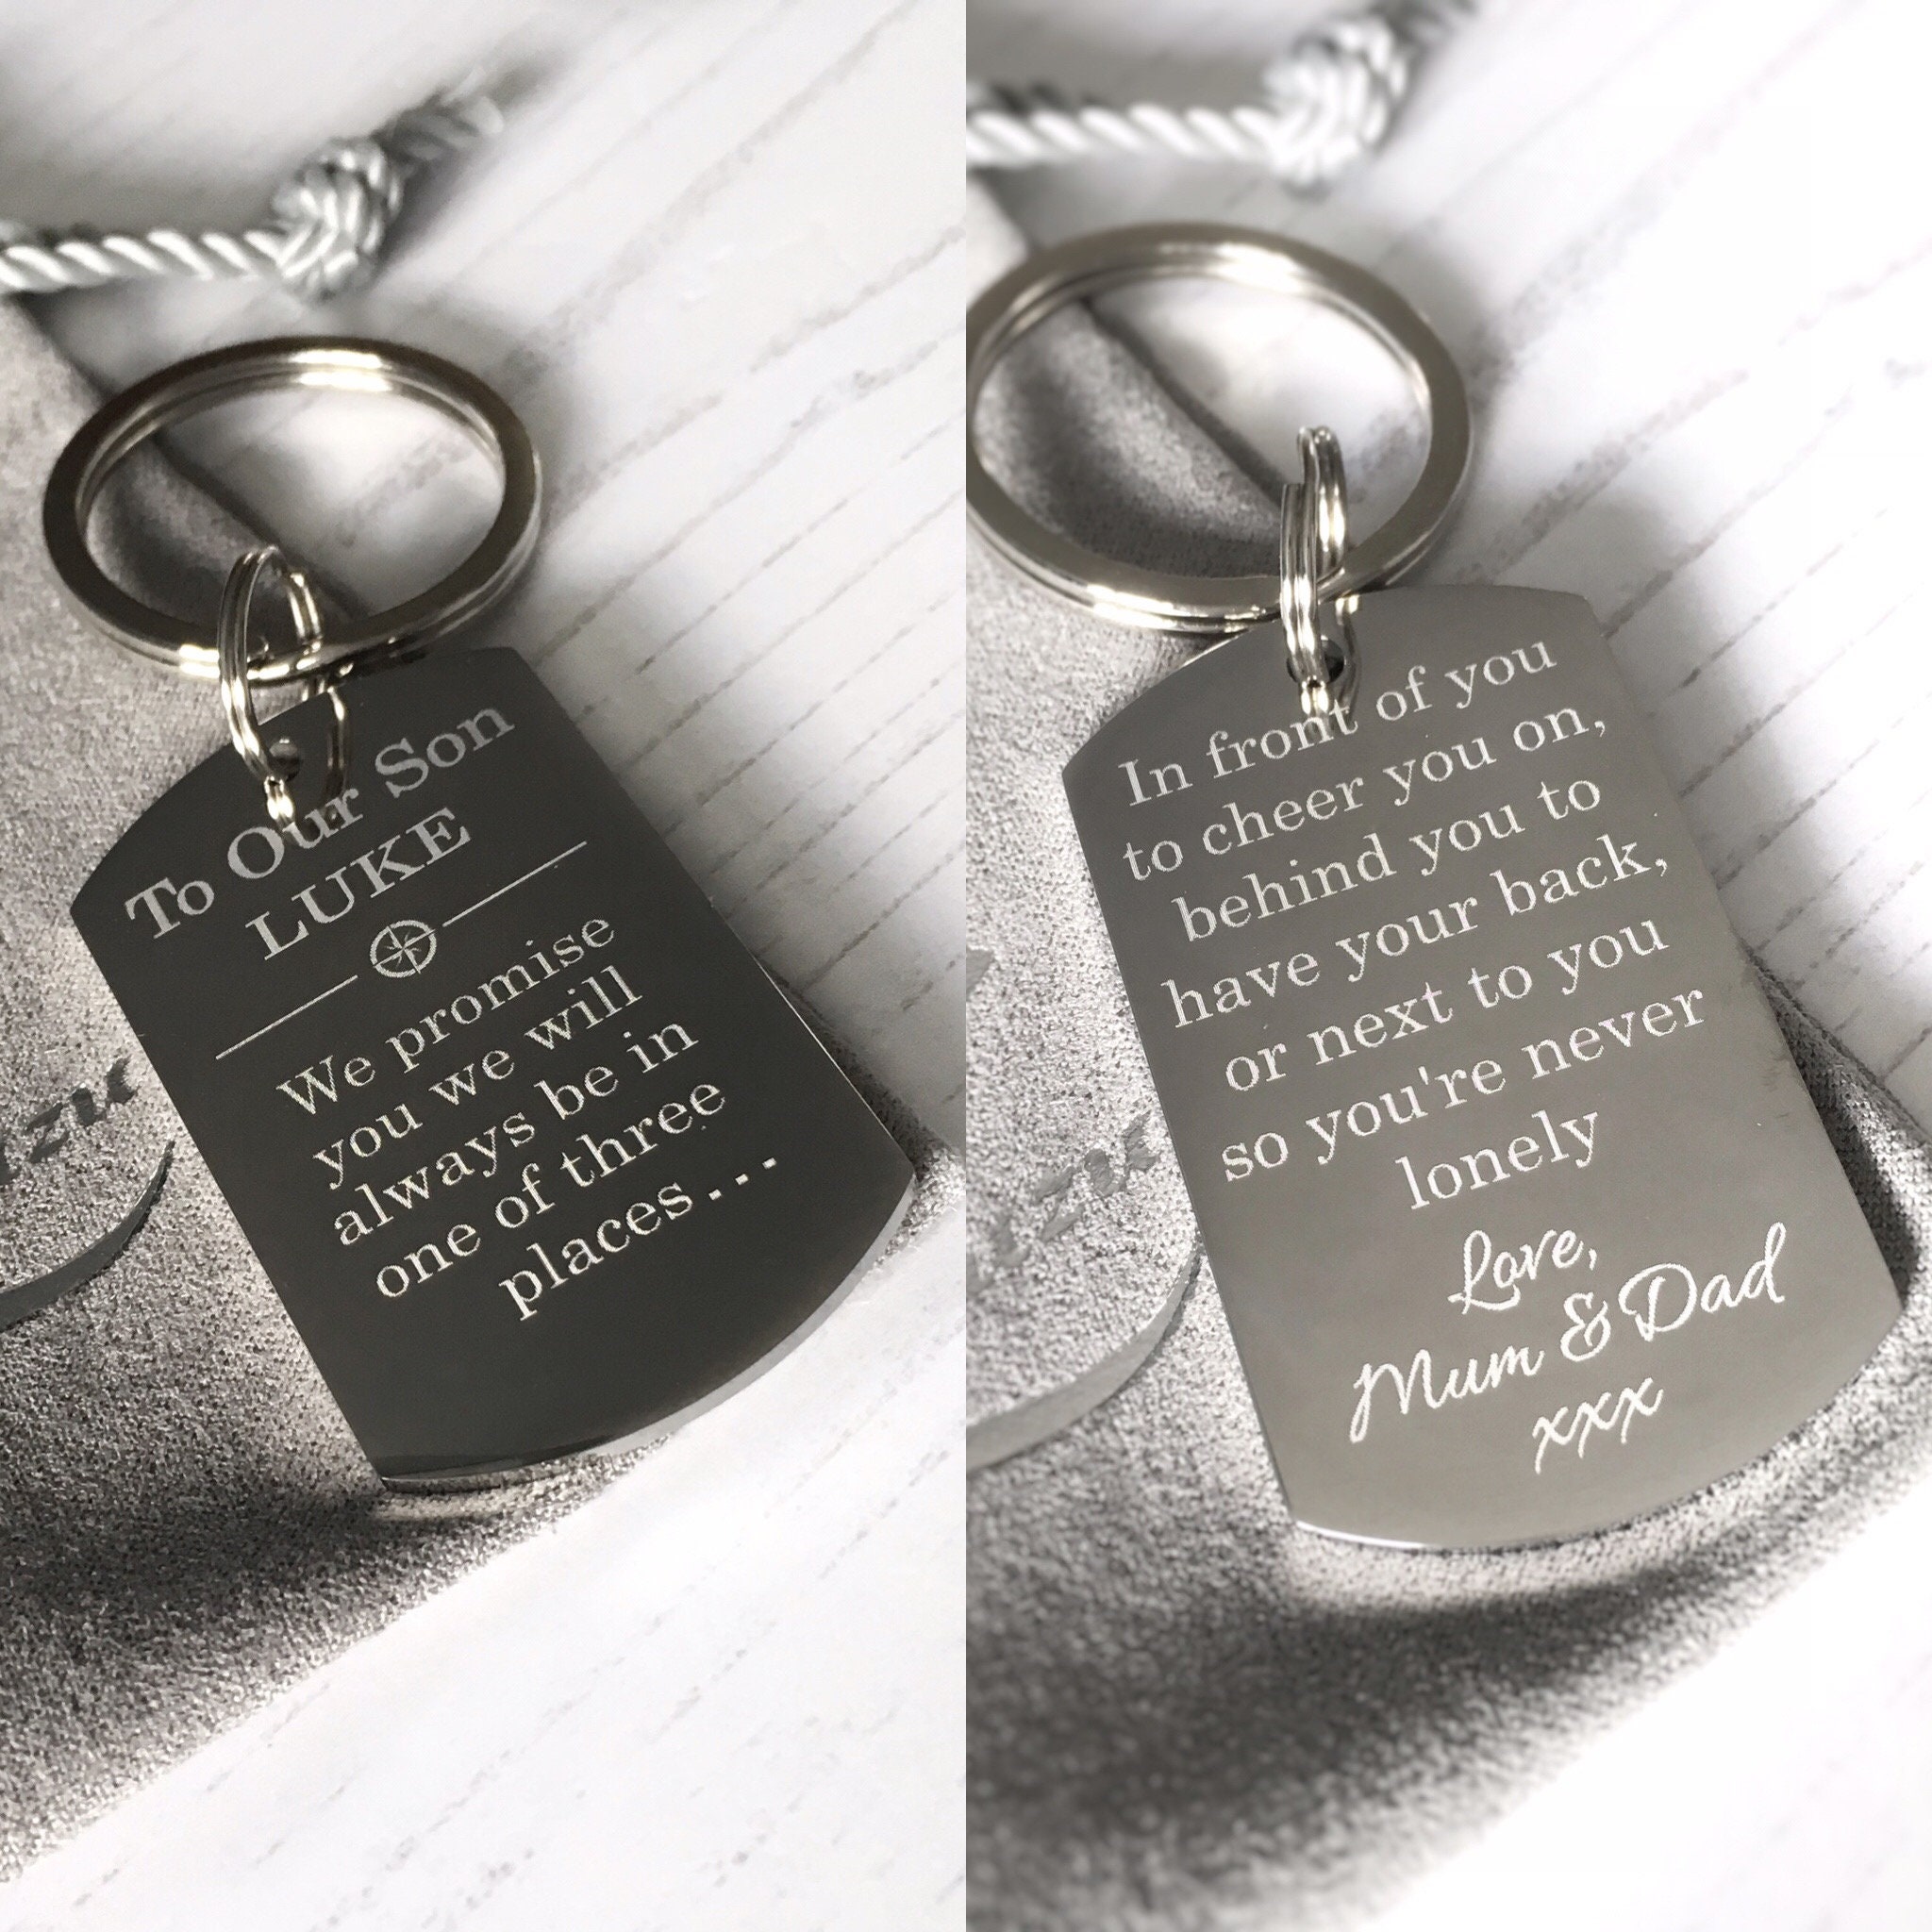 I've got your back' Stainless Steel Motivational Inspirational Keychain.  Makes